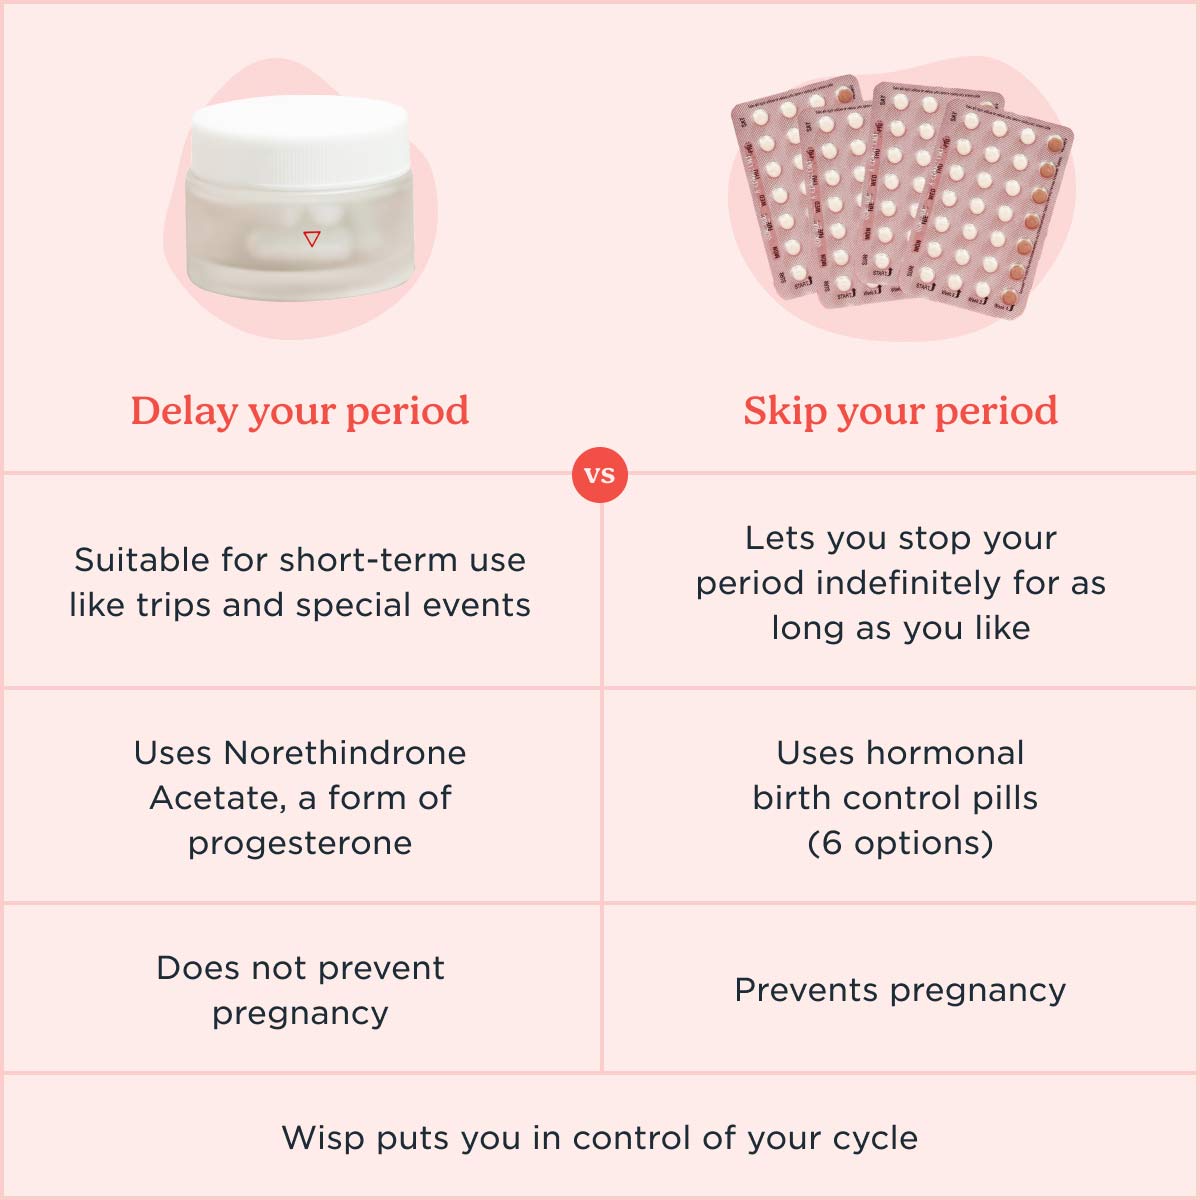 When can I expect my periods after stopping birth control pills